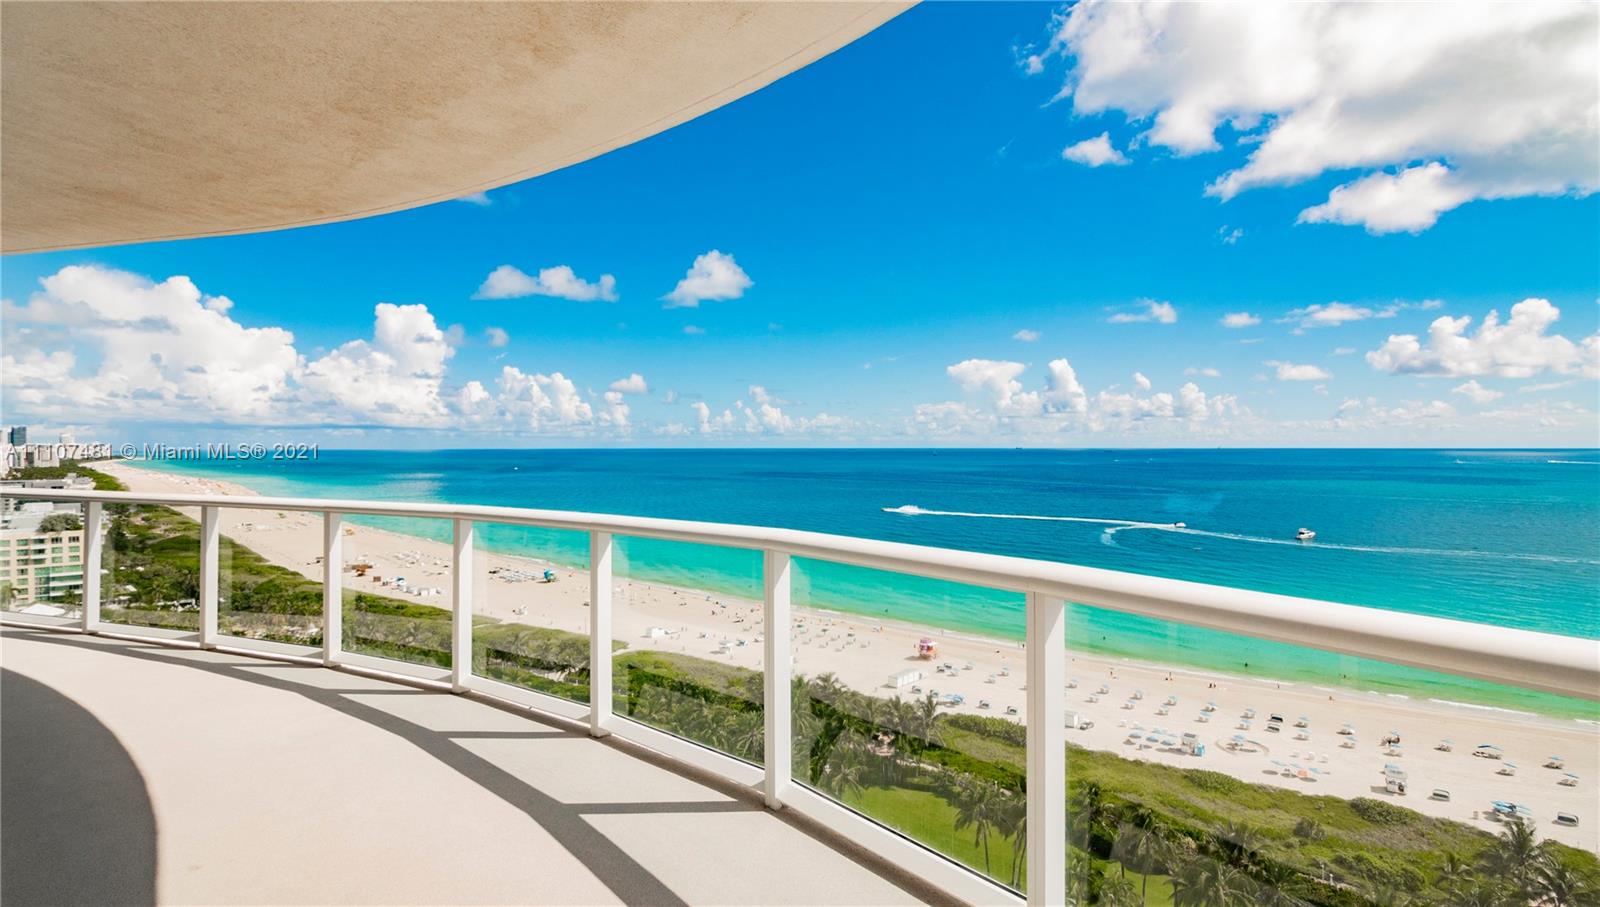 100 S Pointe Dr 1906/07, Miami Beach, Florida 33139, 5 Bedrooms Bedrooms, ,4 BathroomsBathrooms,Residential,For Sale,100 S Pointe Dr 1906/07,A11107481